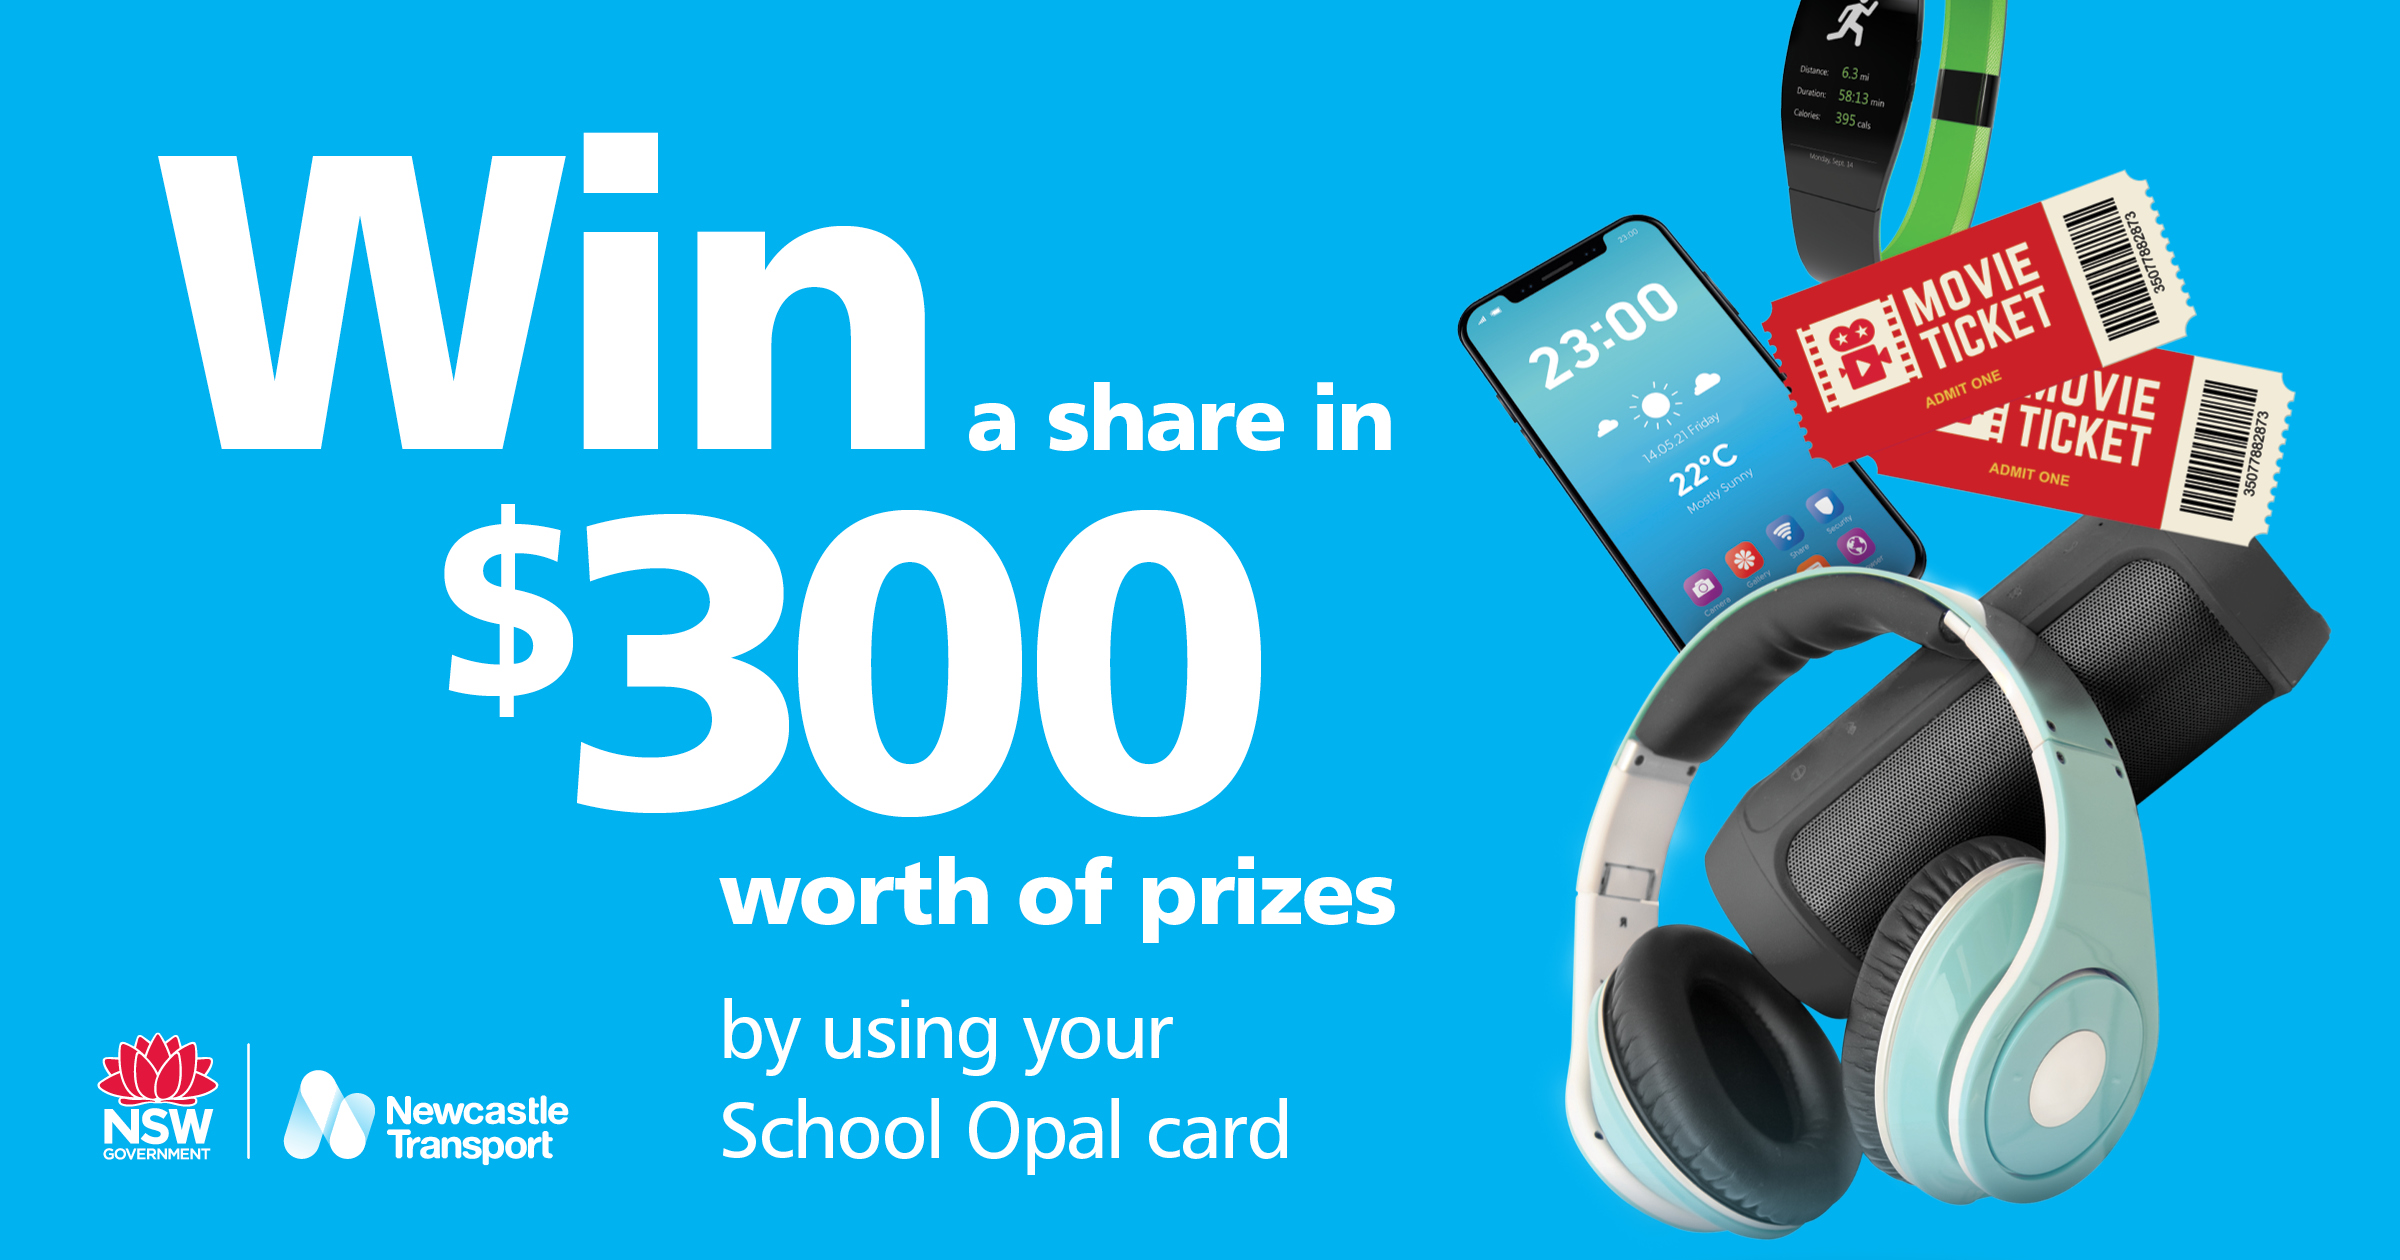 Win a share in $300 with images of movie tickets, mobile phone, headphones, smart watch and bluetooth speaker